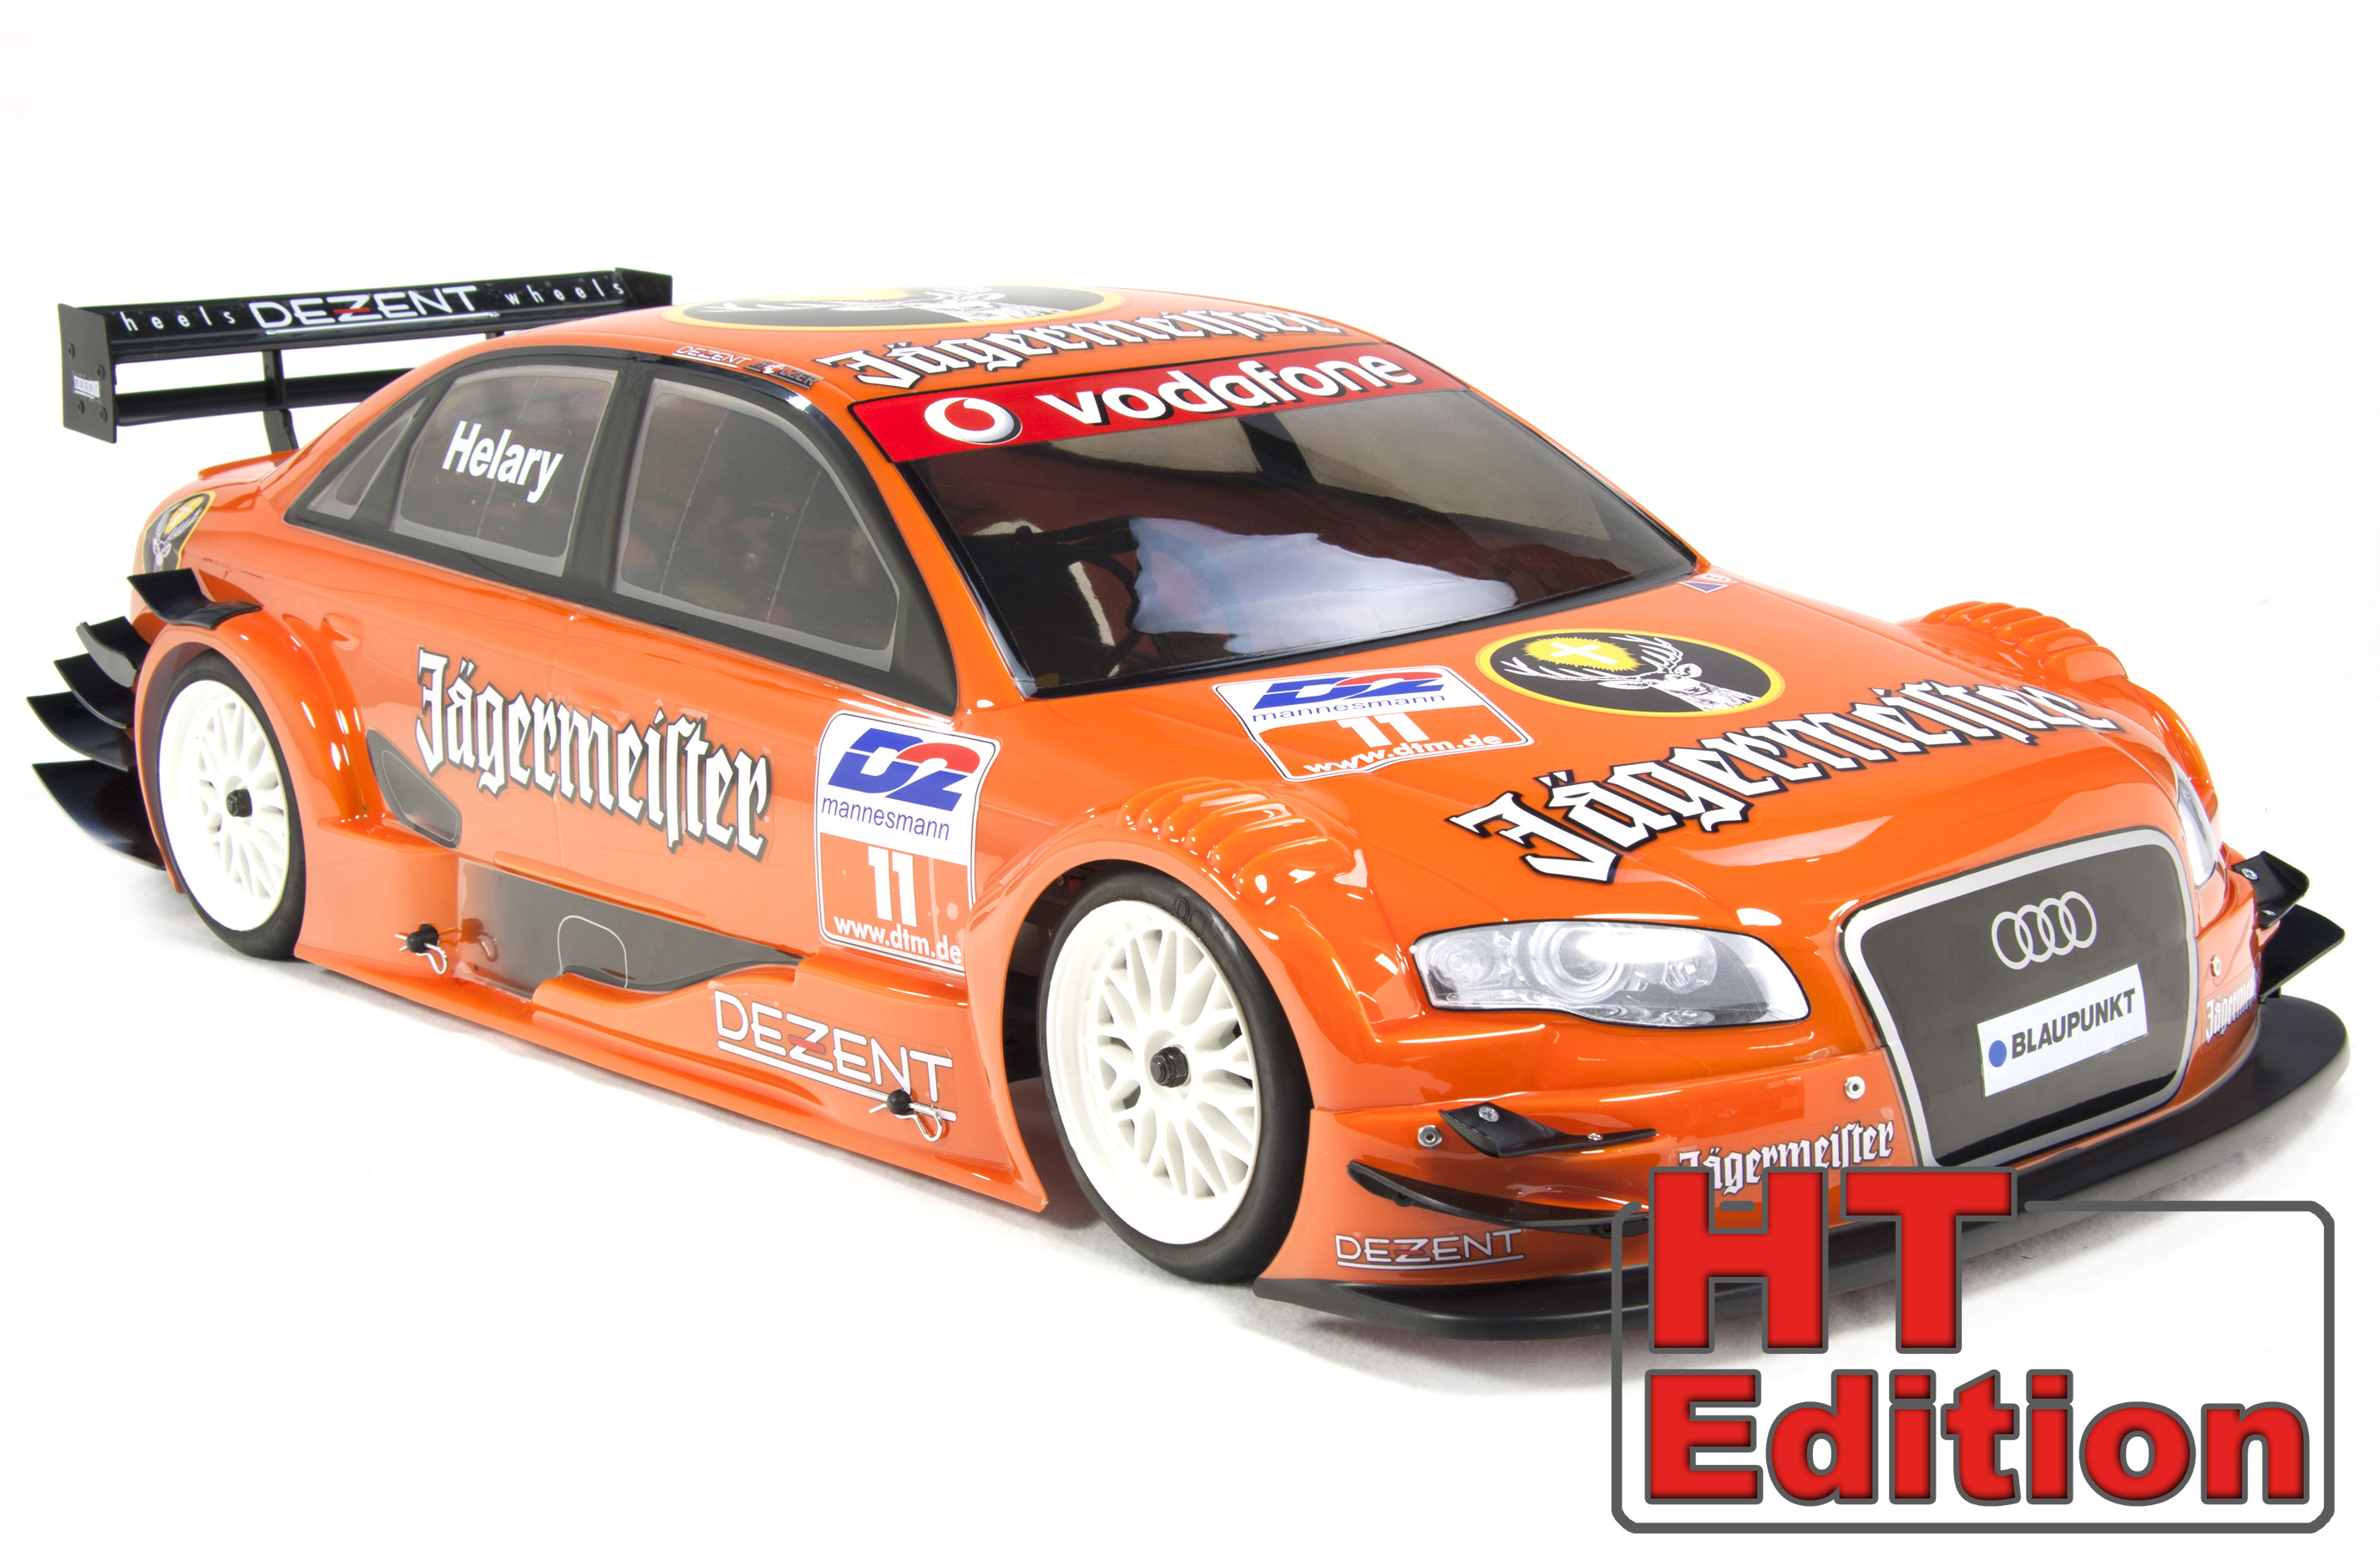 FG Sportsline 4WD-530 with Audi A4 body HT-Edition